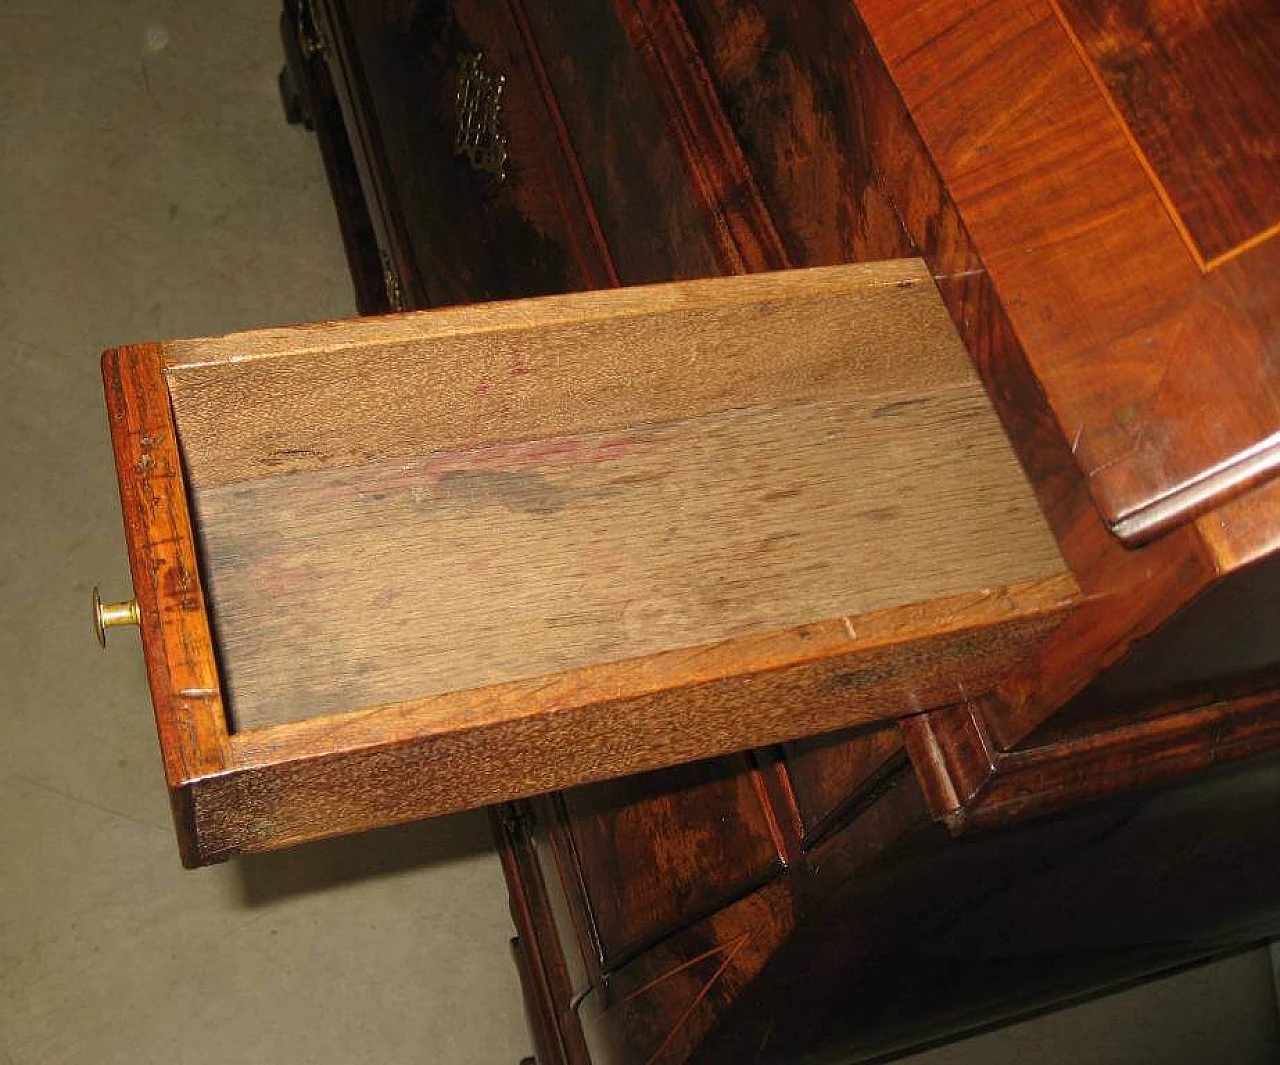 English folding table with riser, early 1800s 1210192